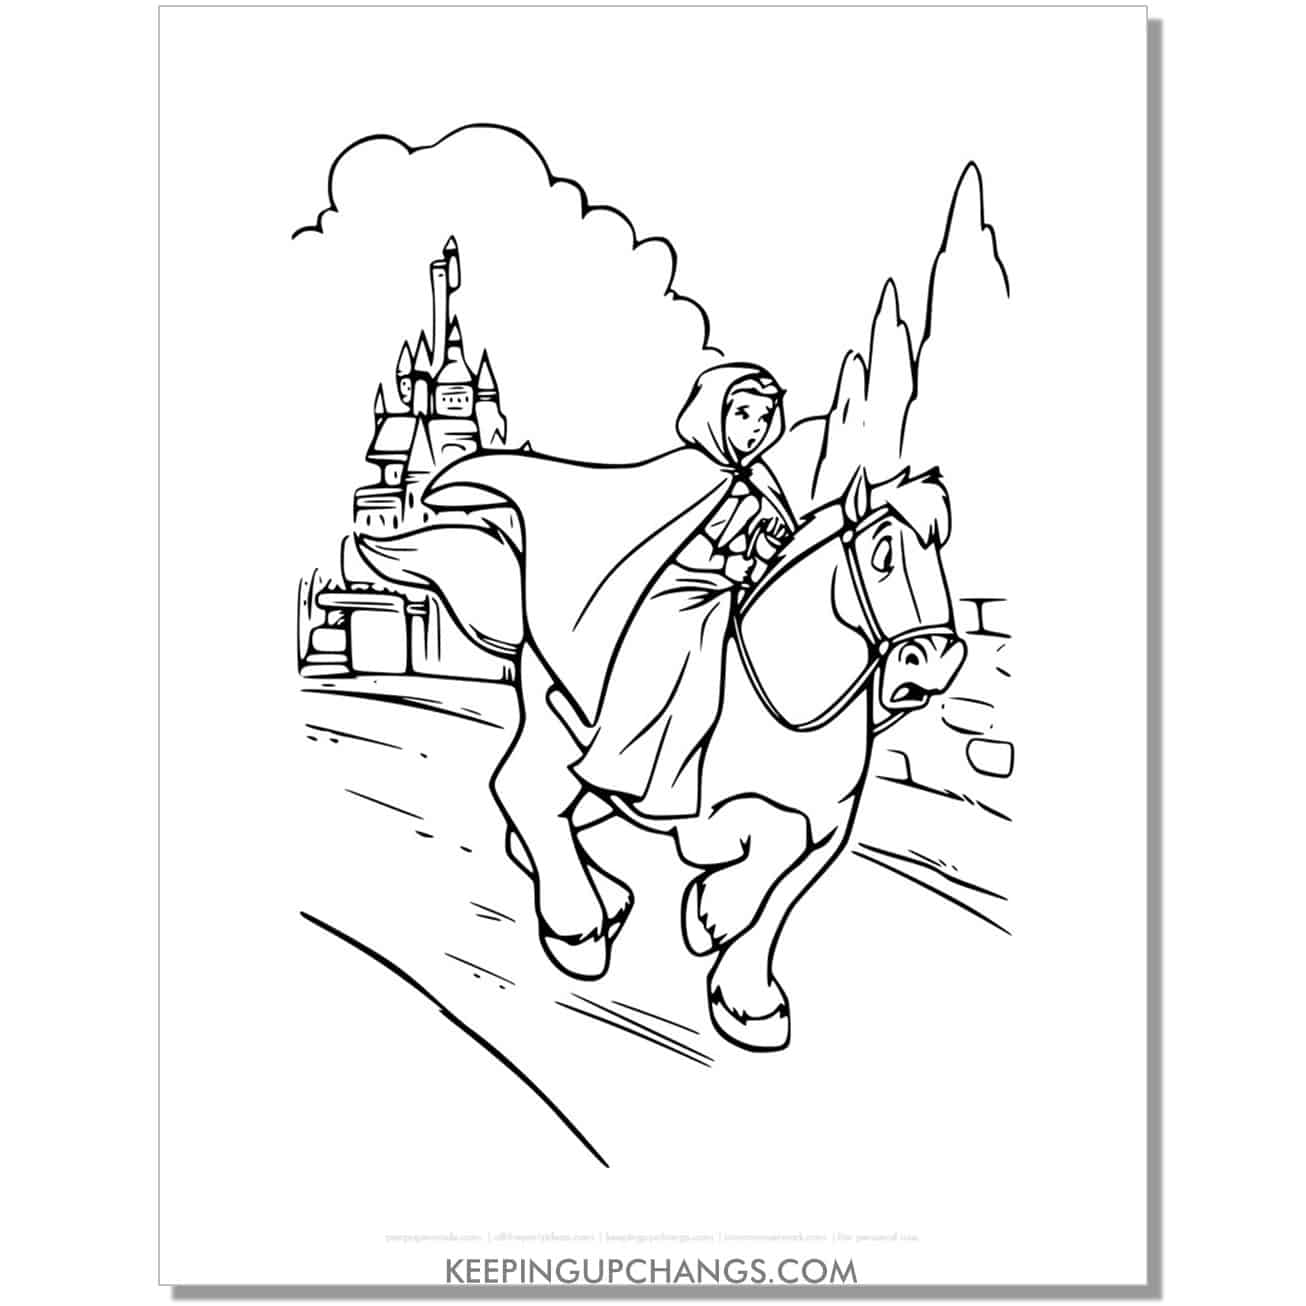 beauty and beast belle goes away on horse coloring page, sheet.